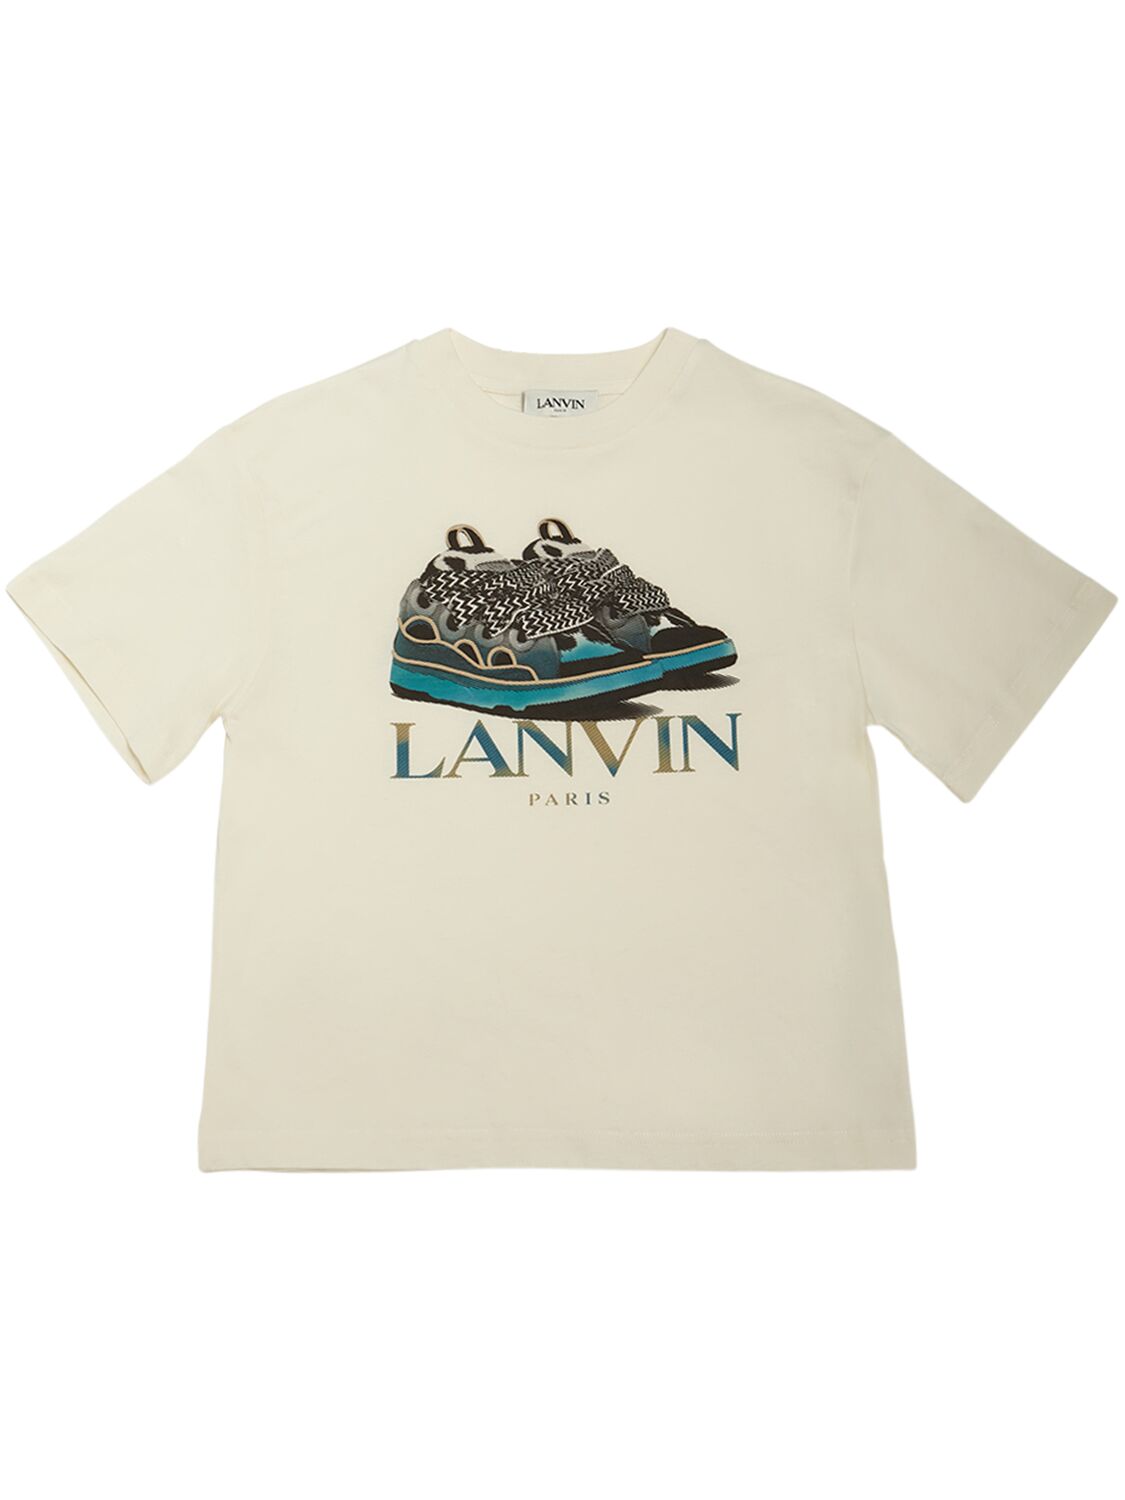 Lanvin Kids' Printed Cotton Jersey T-shirt In Off White